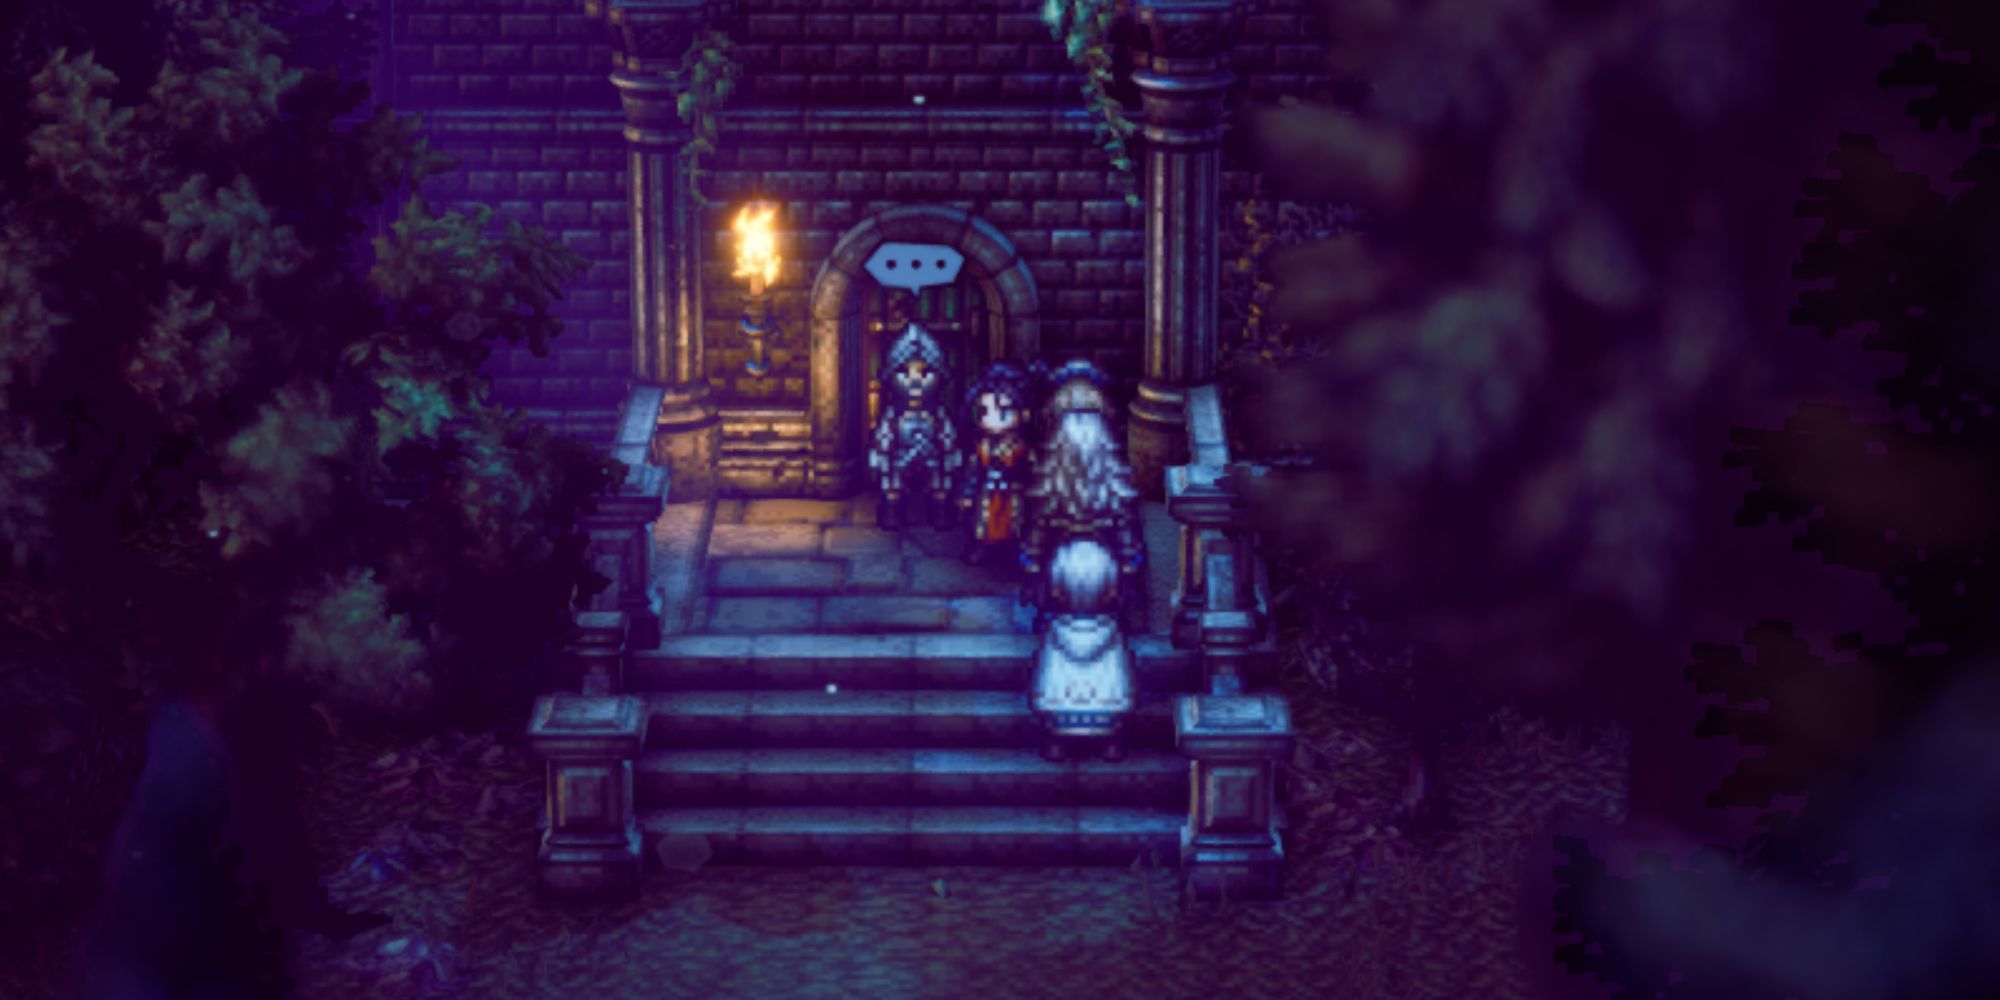 Octopath Traveler 2, Old Soldier outside of Timberain Castle at Night